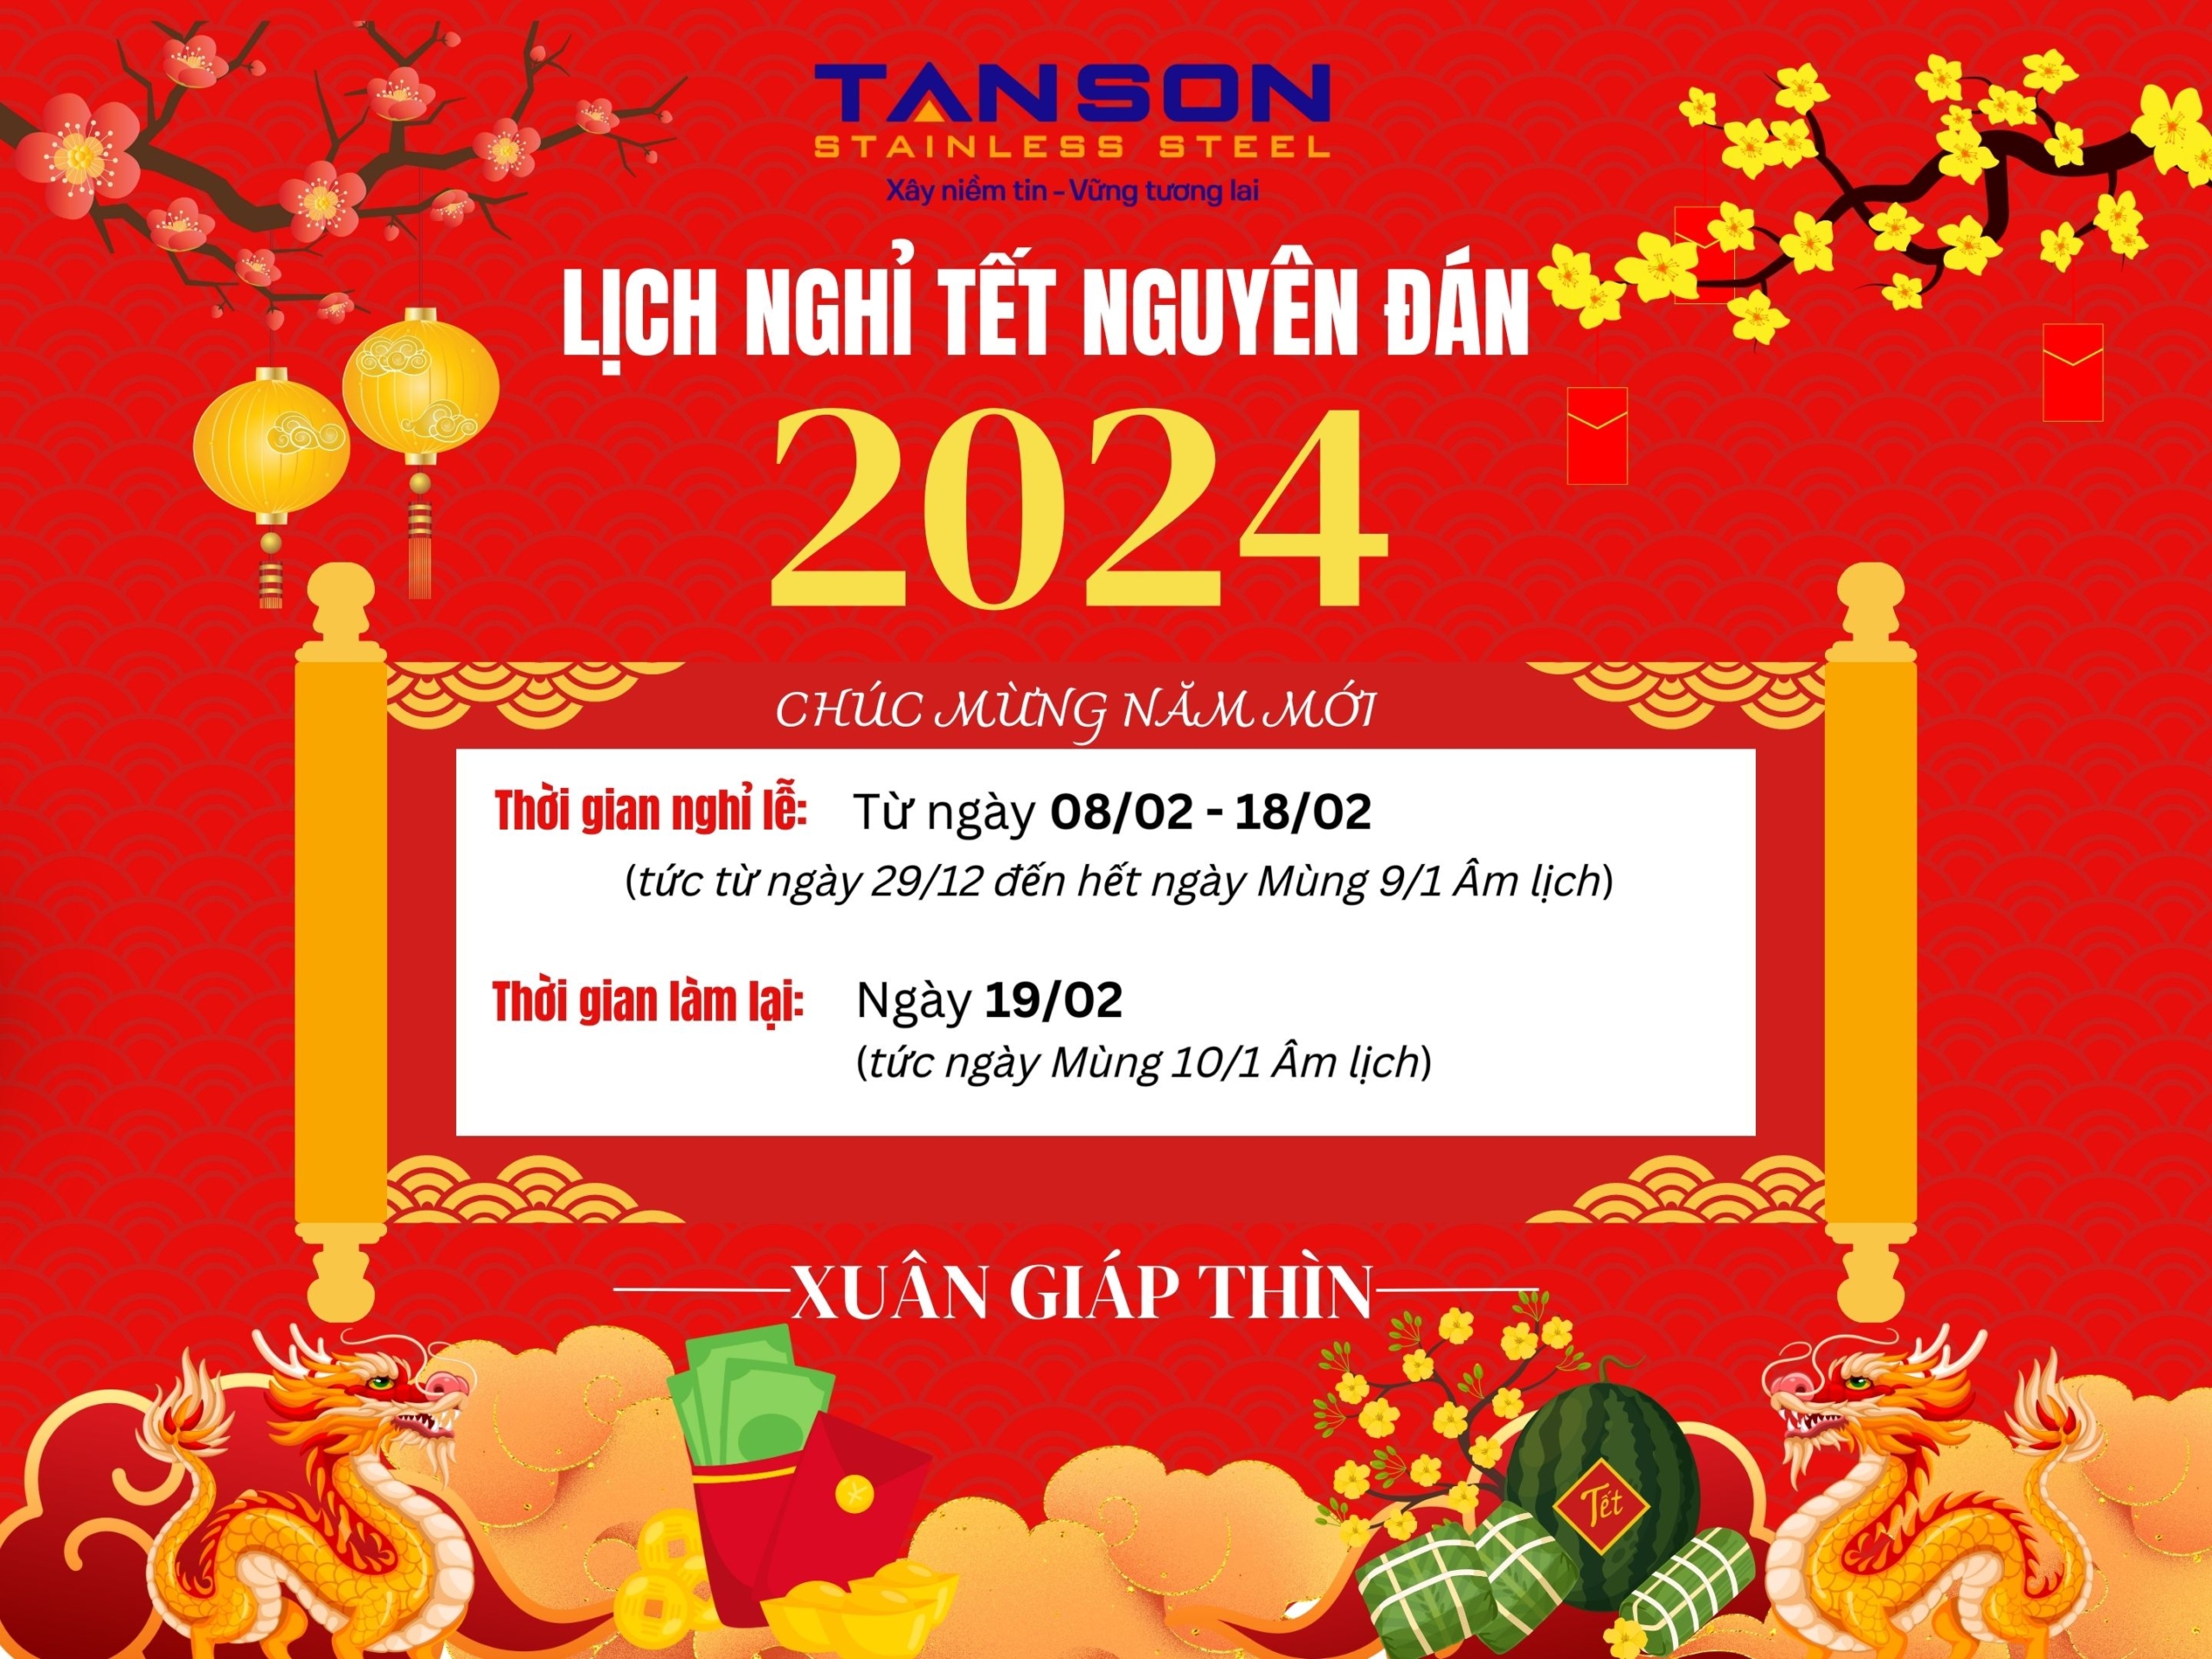 inoxtanson thong bao lich nghi le tet nguyen dan am lich nam 2024 official scaled